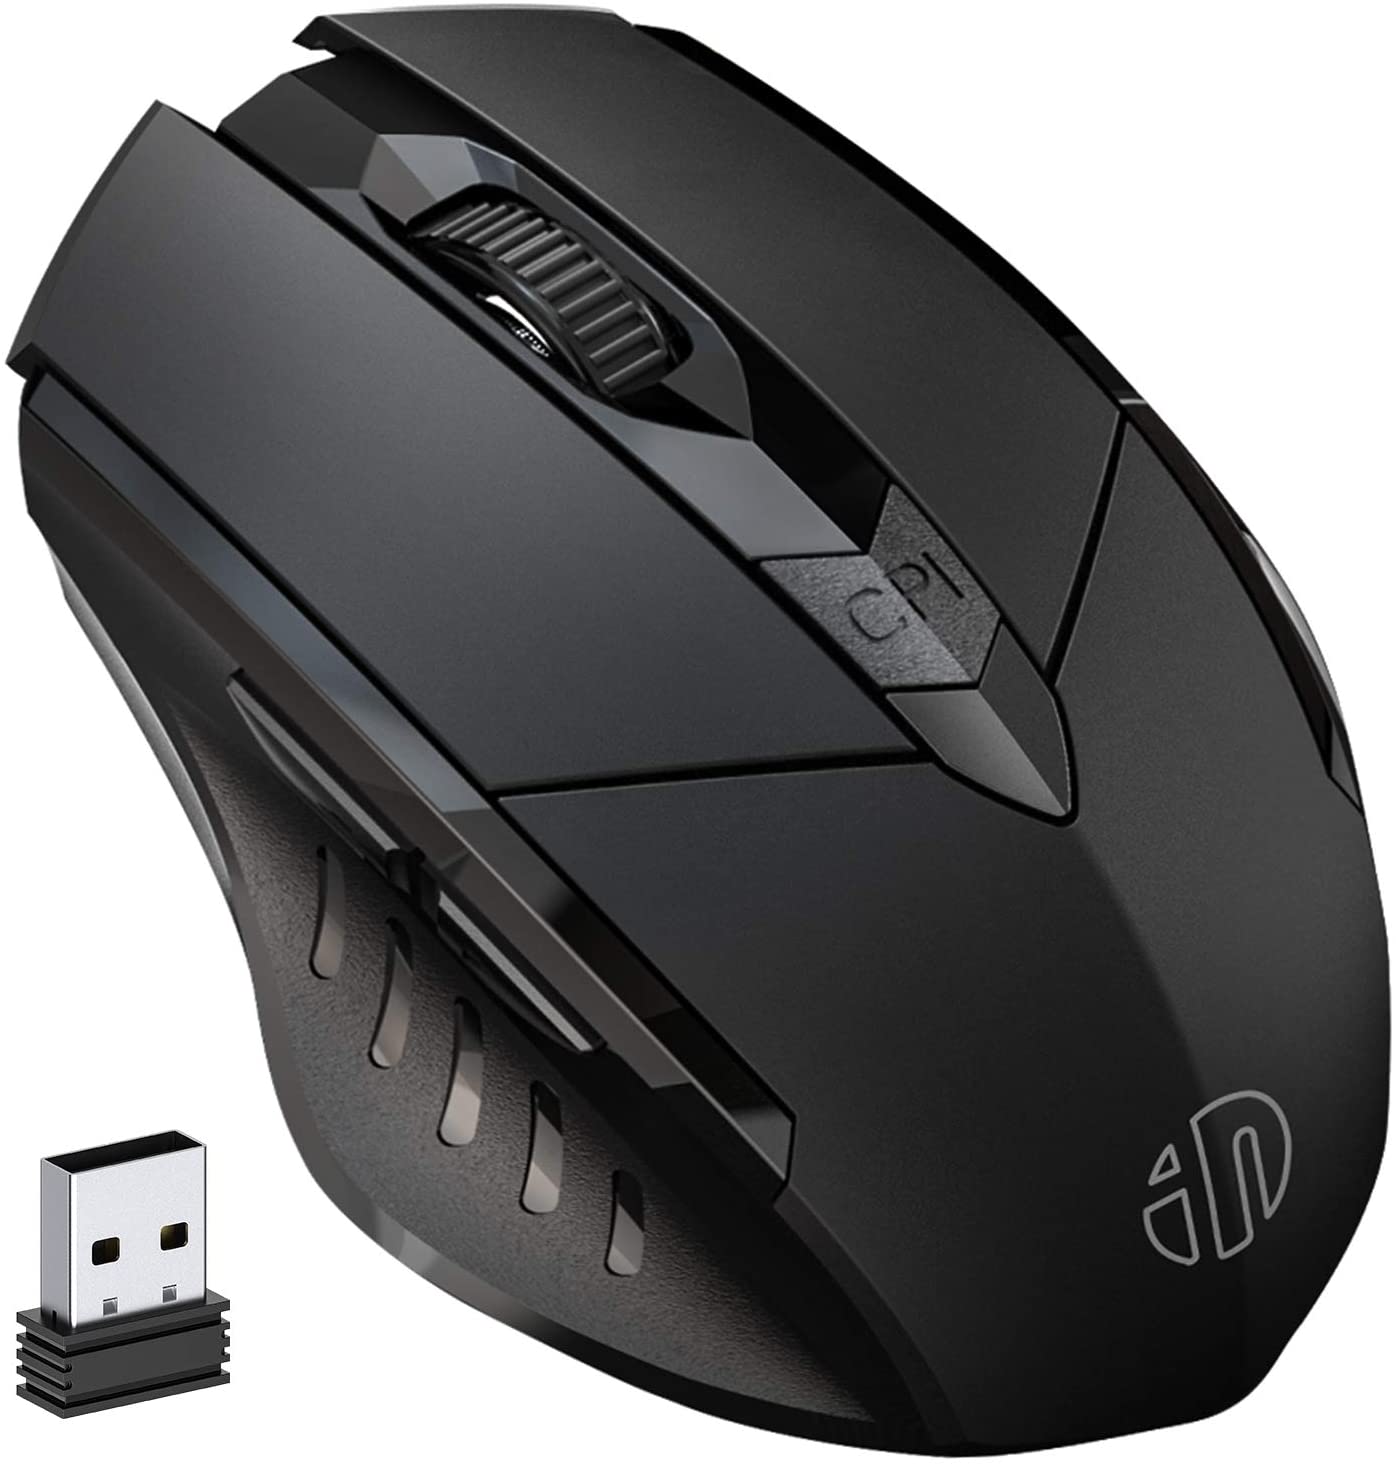 Inphic Electronics  Large Ergonomic 2.4G Rechargeable Wireless Mouse $7.14